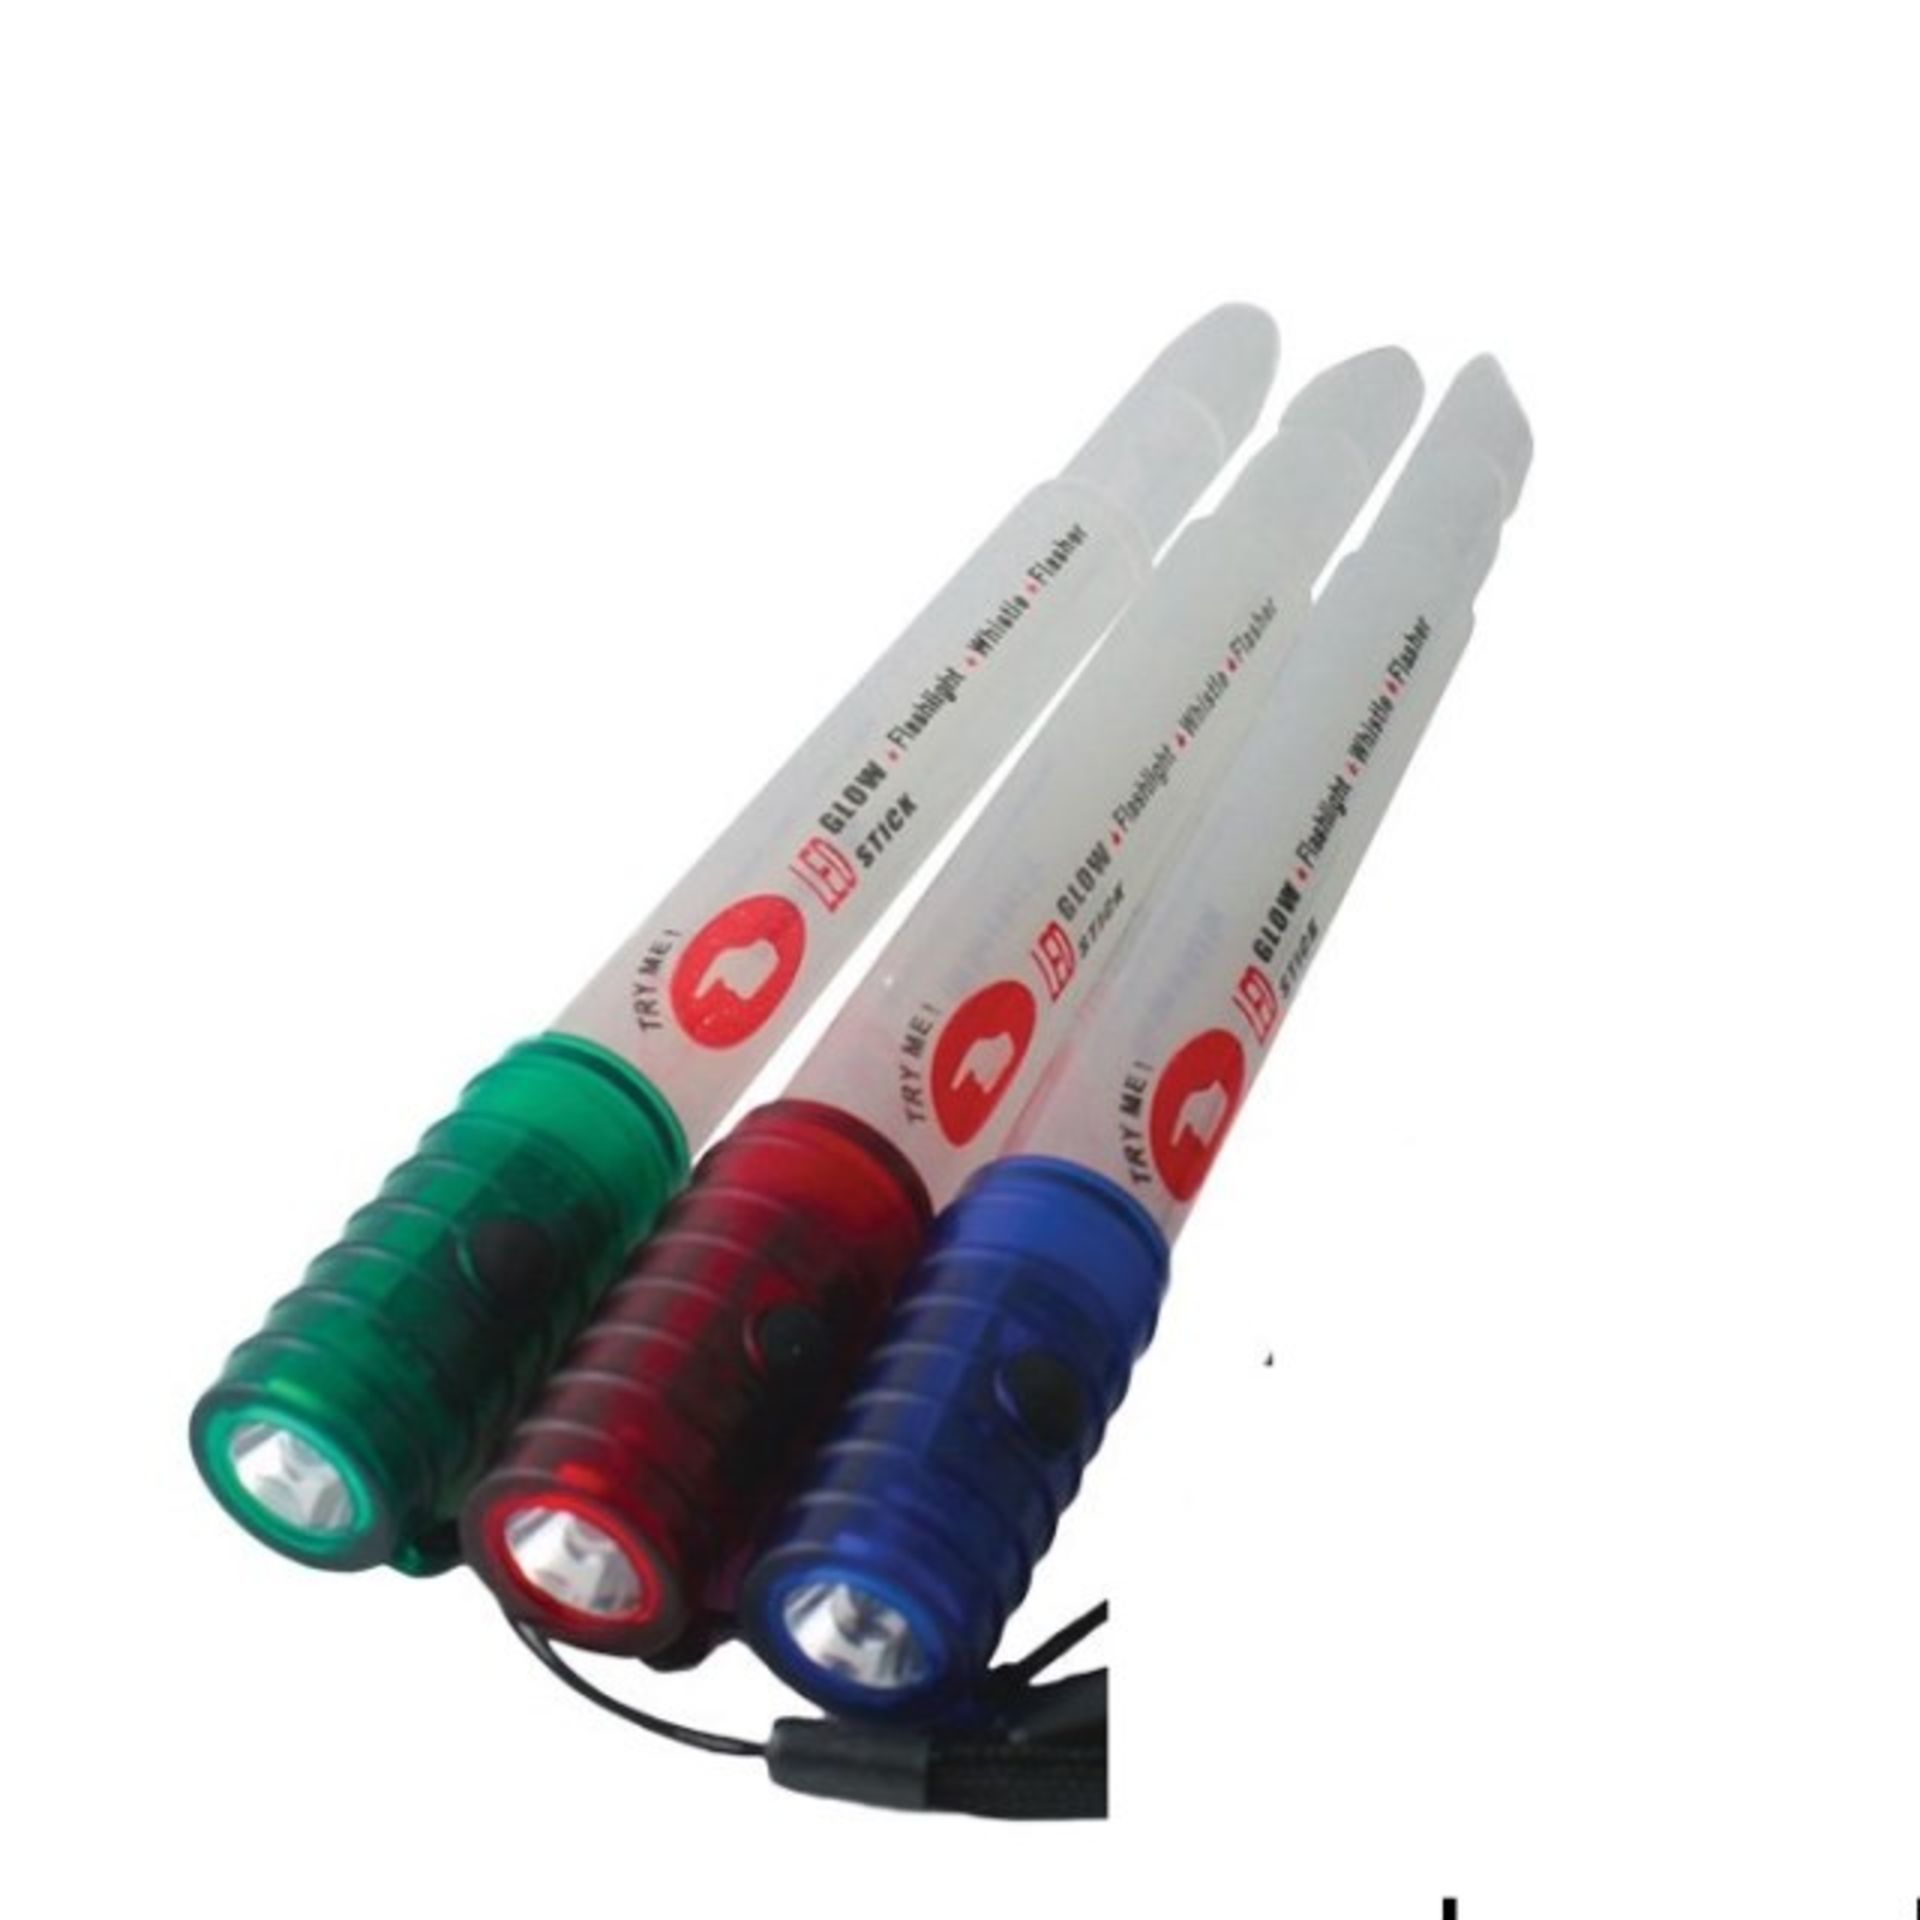 V *TRADE QTY* Brand New Three LED Glowstick Torches With Emergency Whistle and 3 Light Settings